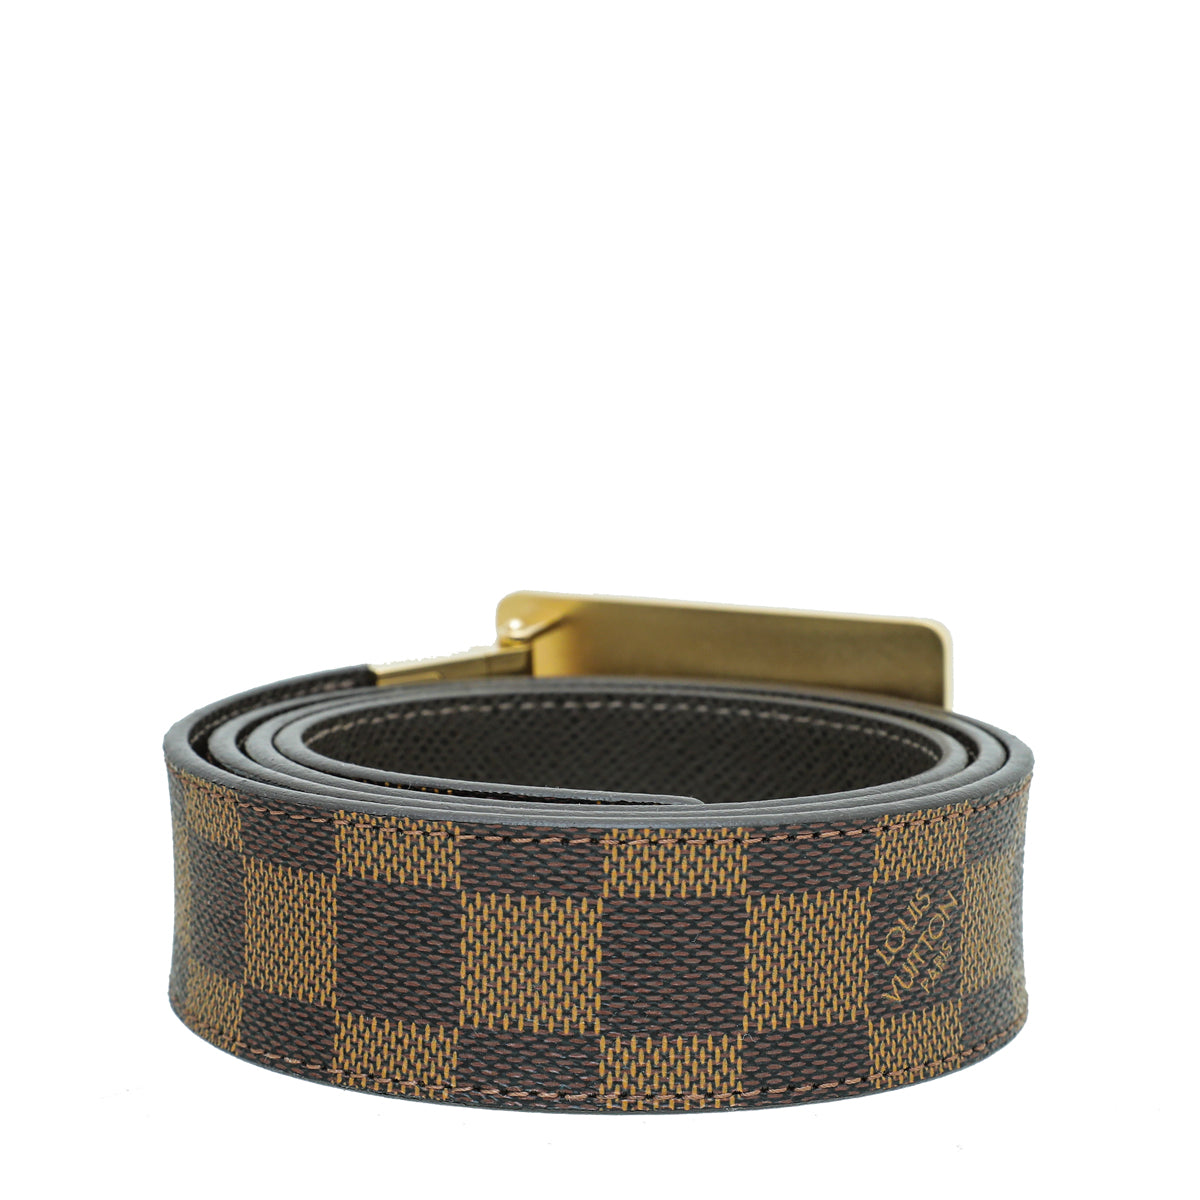 Used Louis Vuitton Belts  Natural Resource Department